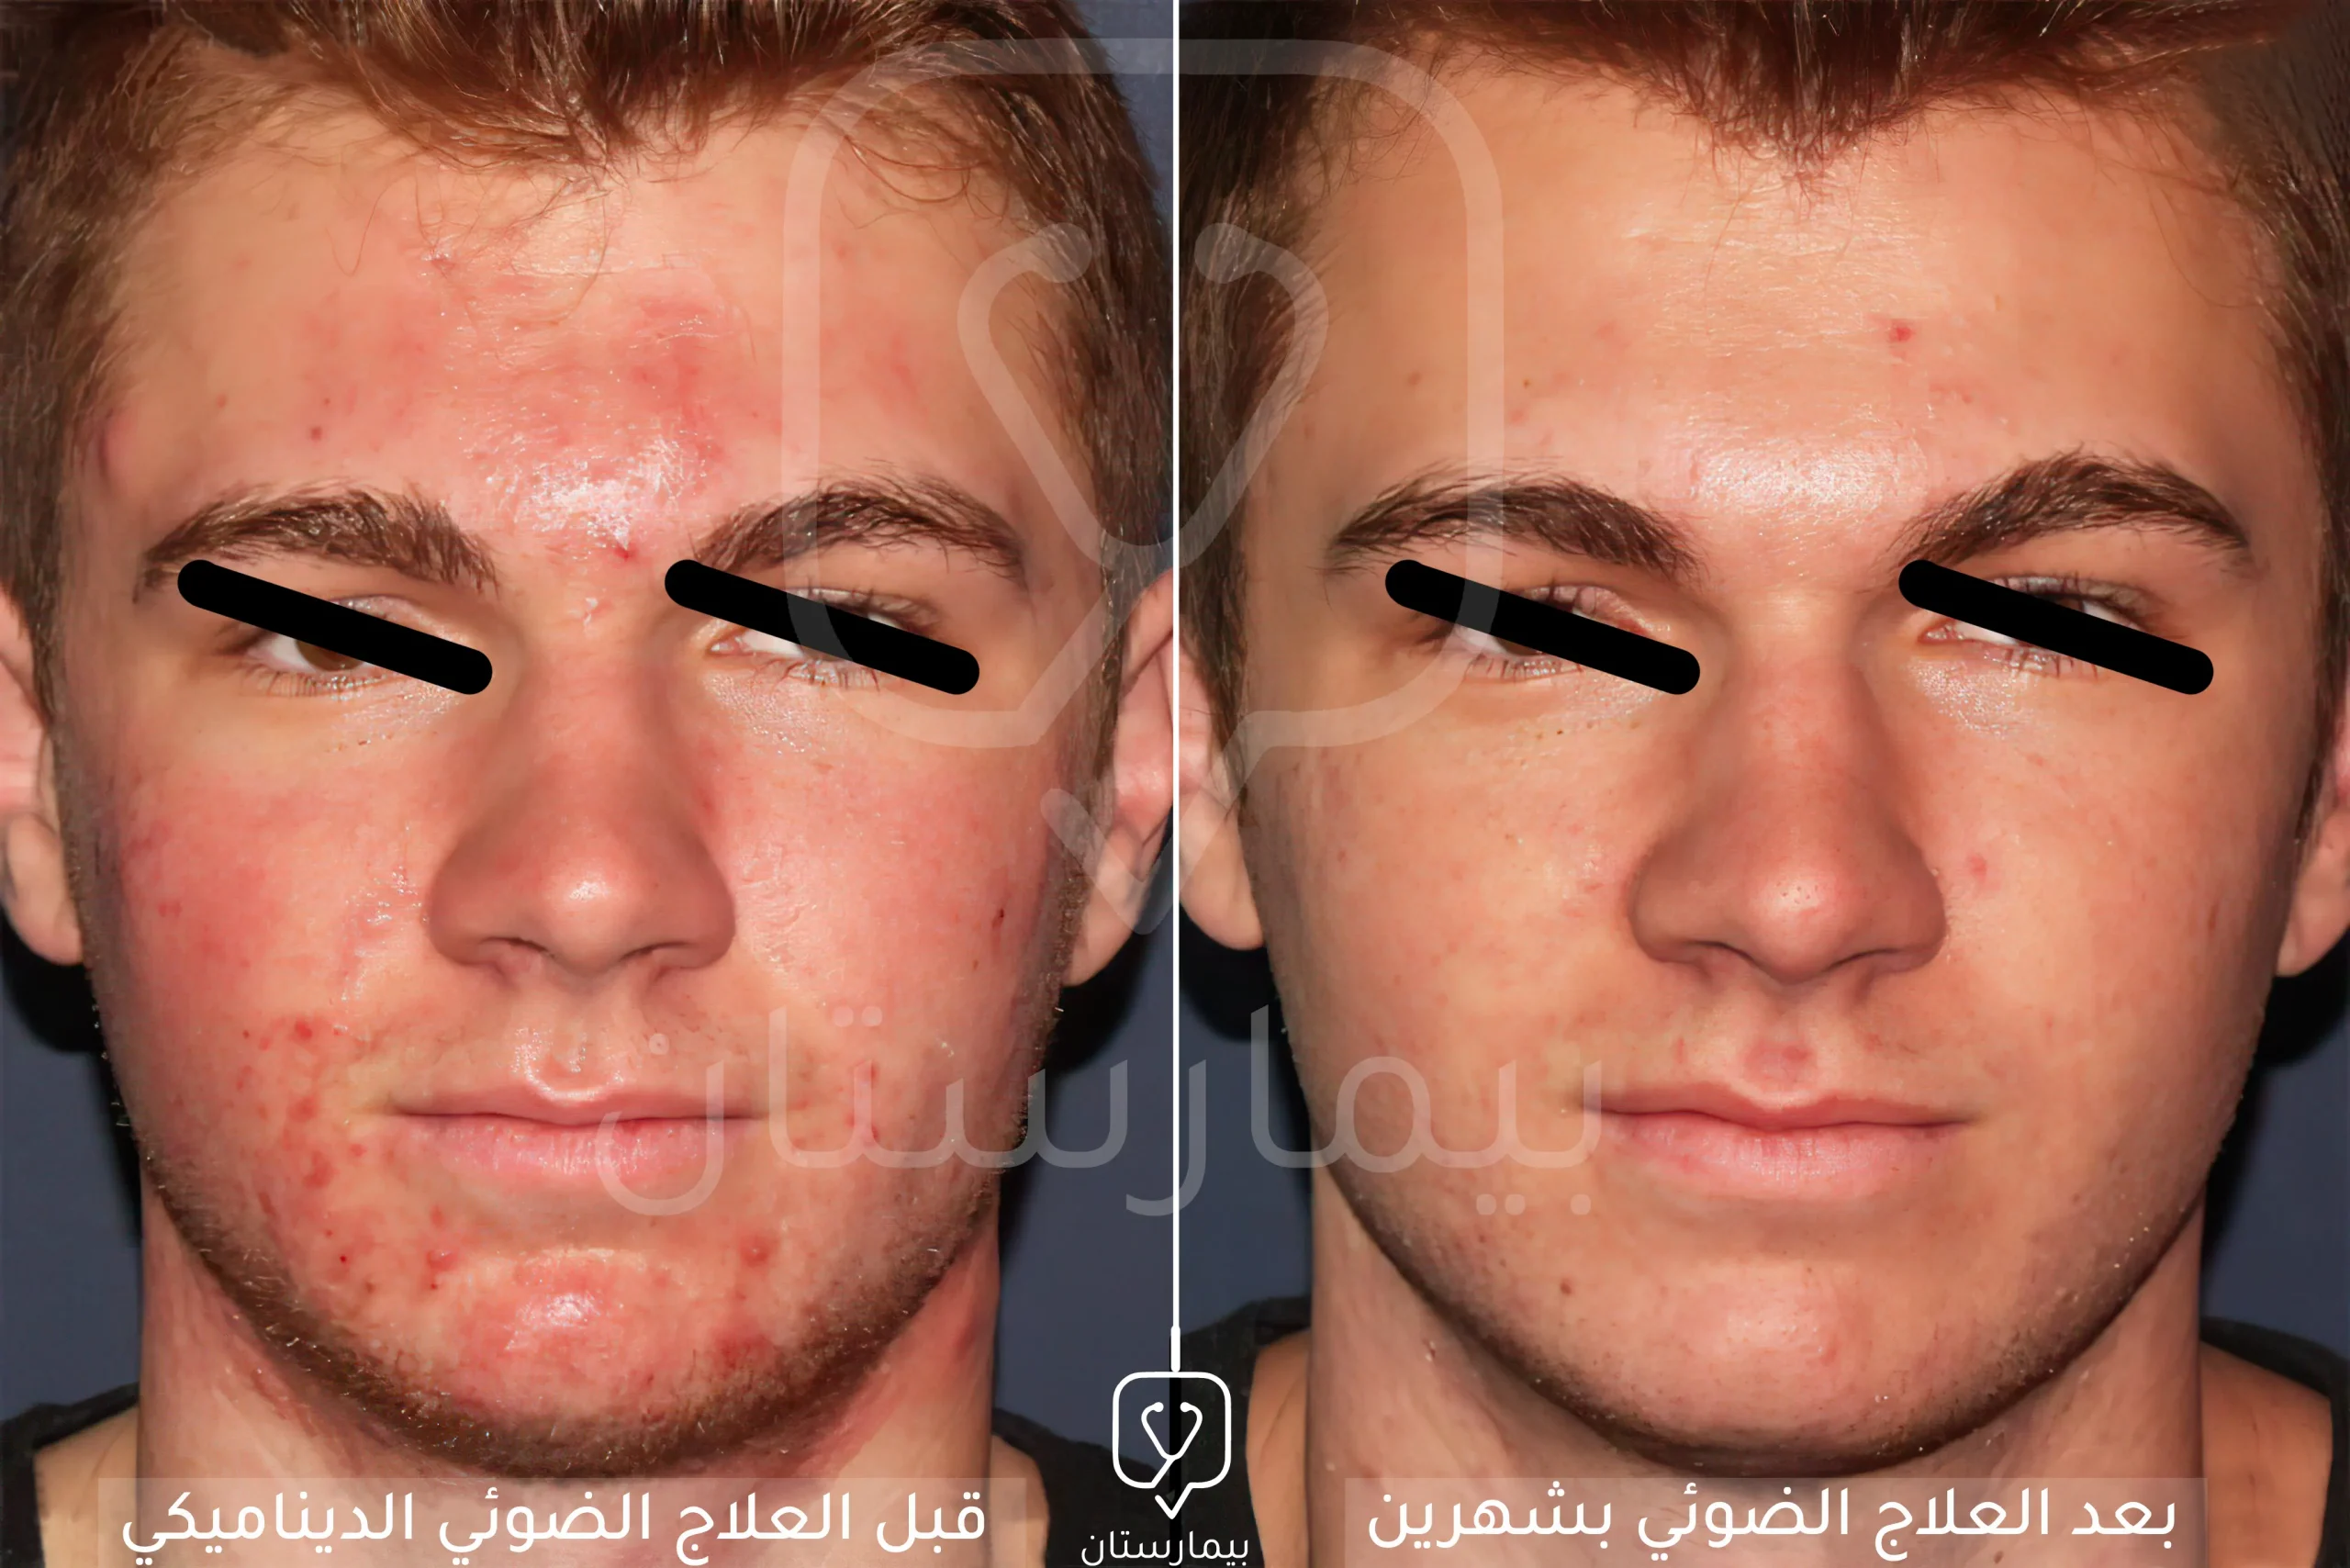 This image shows the effect of photodynamic therapy and its ability to effectively remove skin lesions